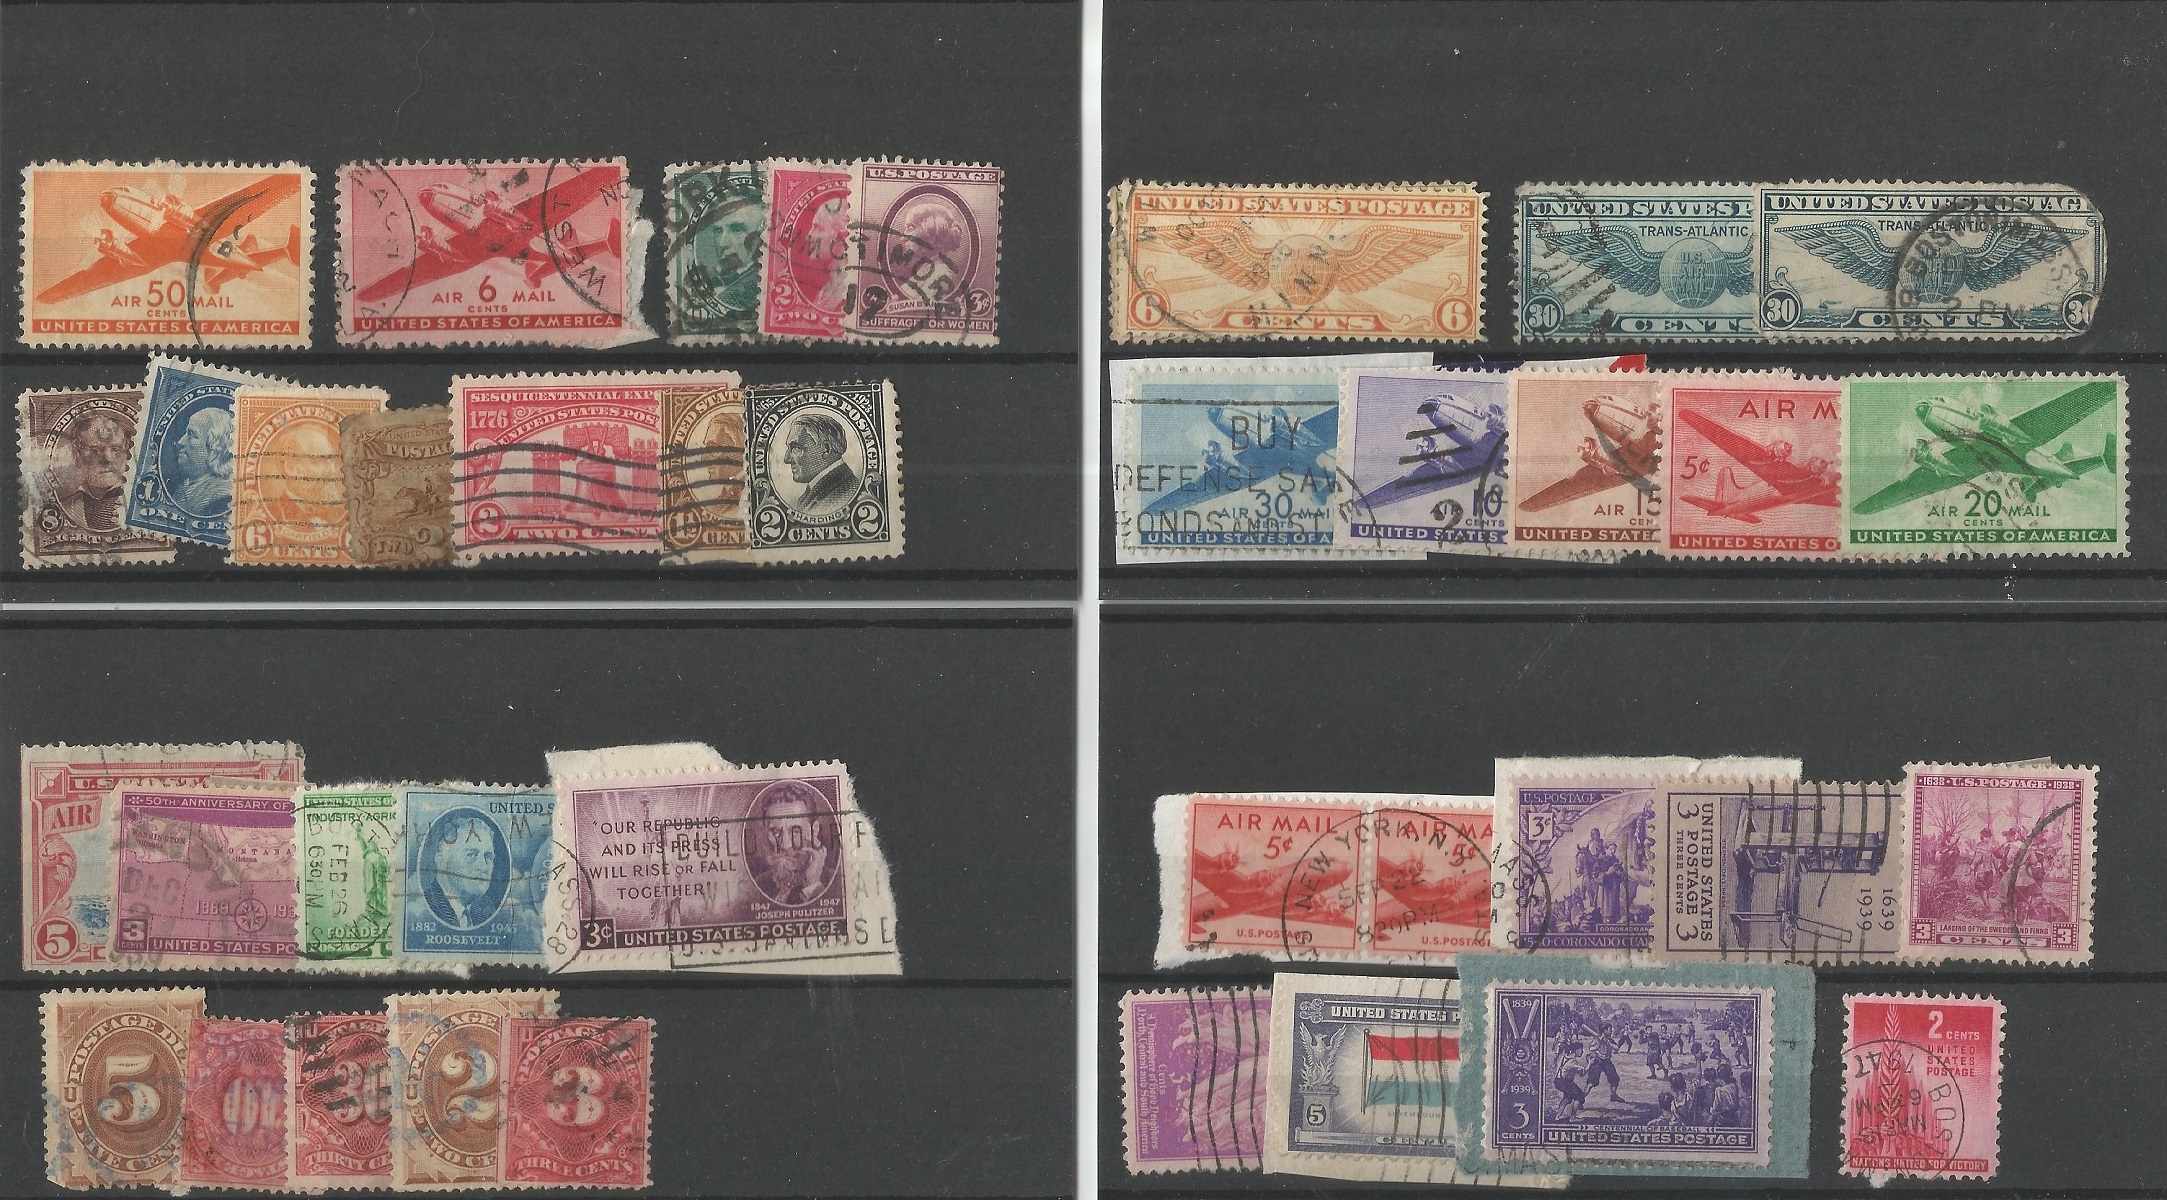 USA stamp collection on 6 stockcards. Good condition. We combine postage on multiple winning lots